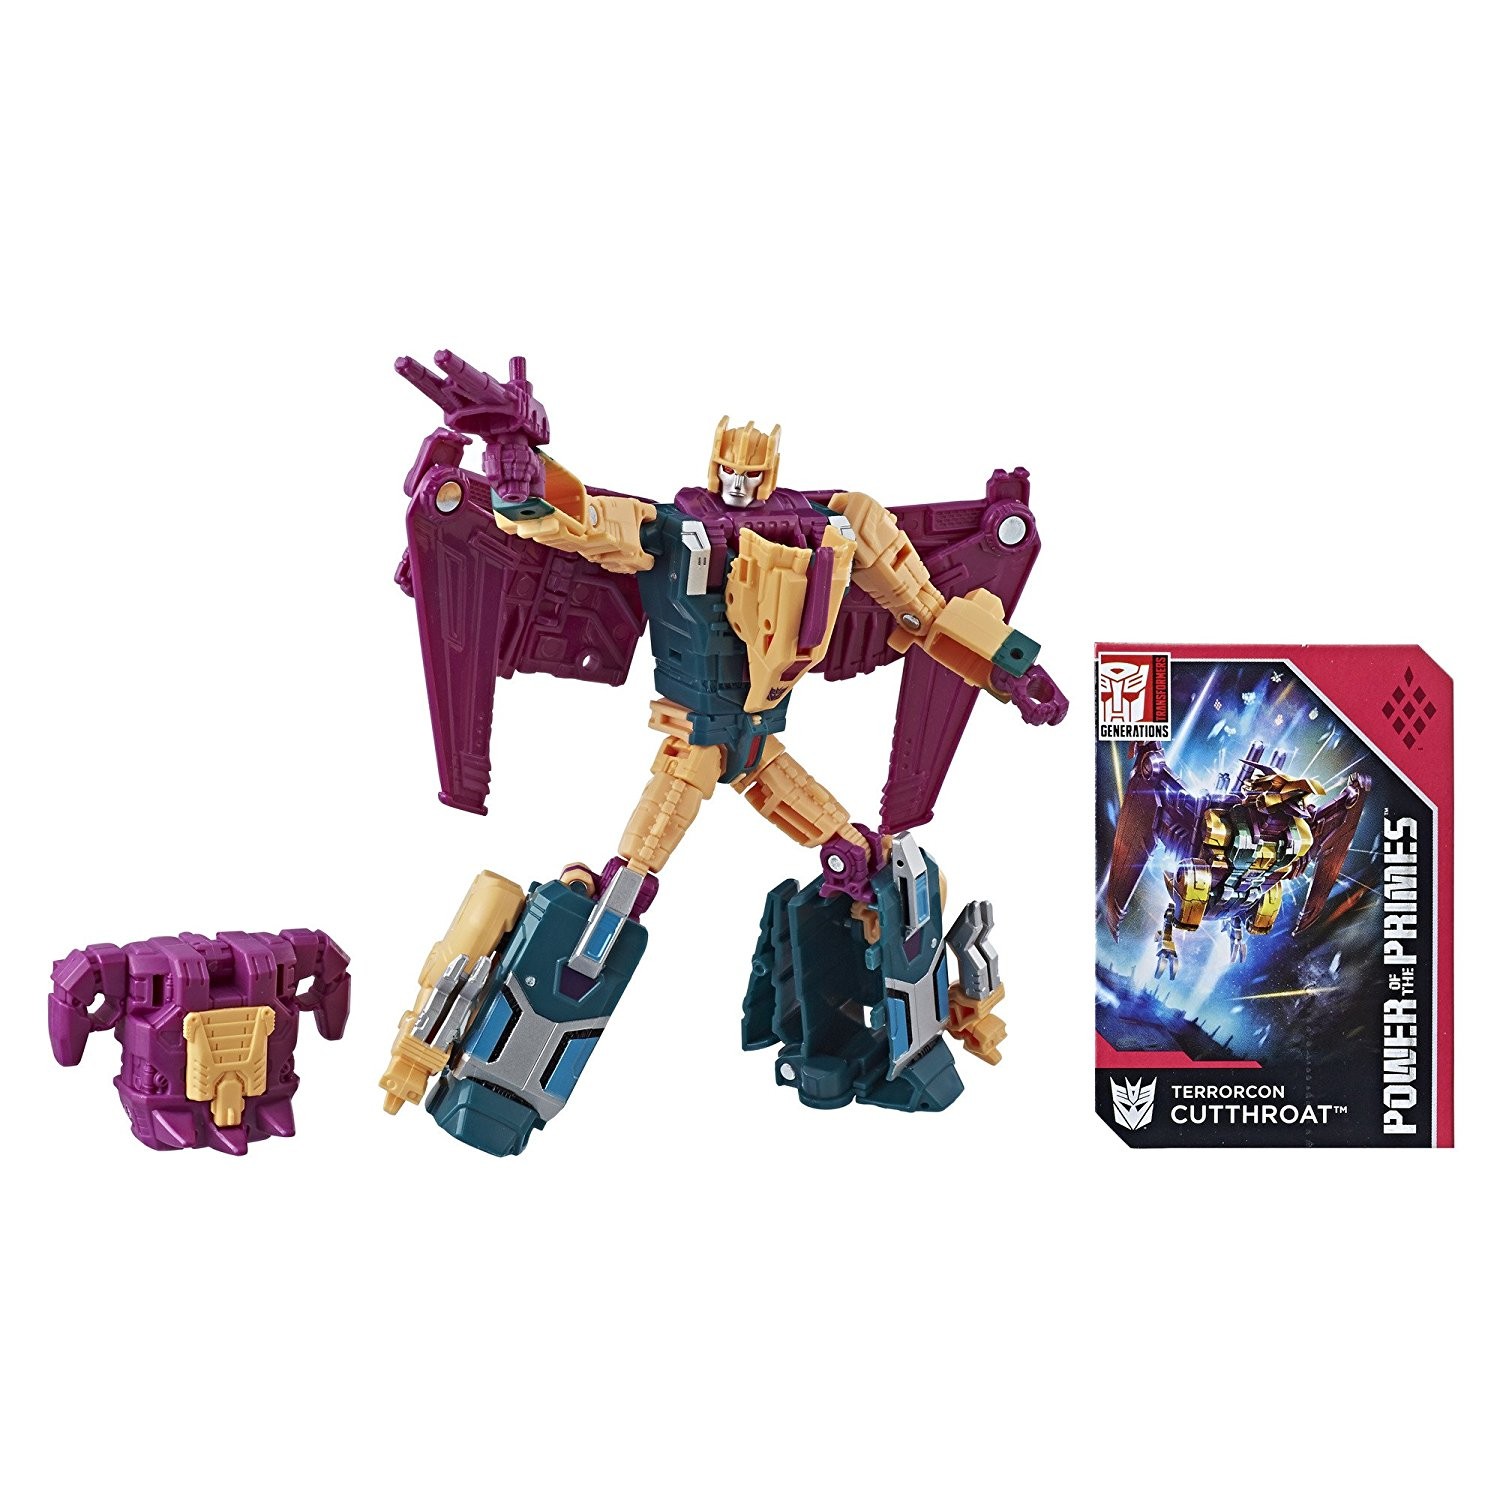 Transformers News: Transformers Power of the Primes Wave 3 Terrorcons Images